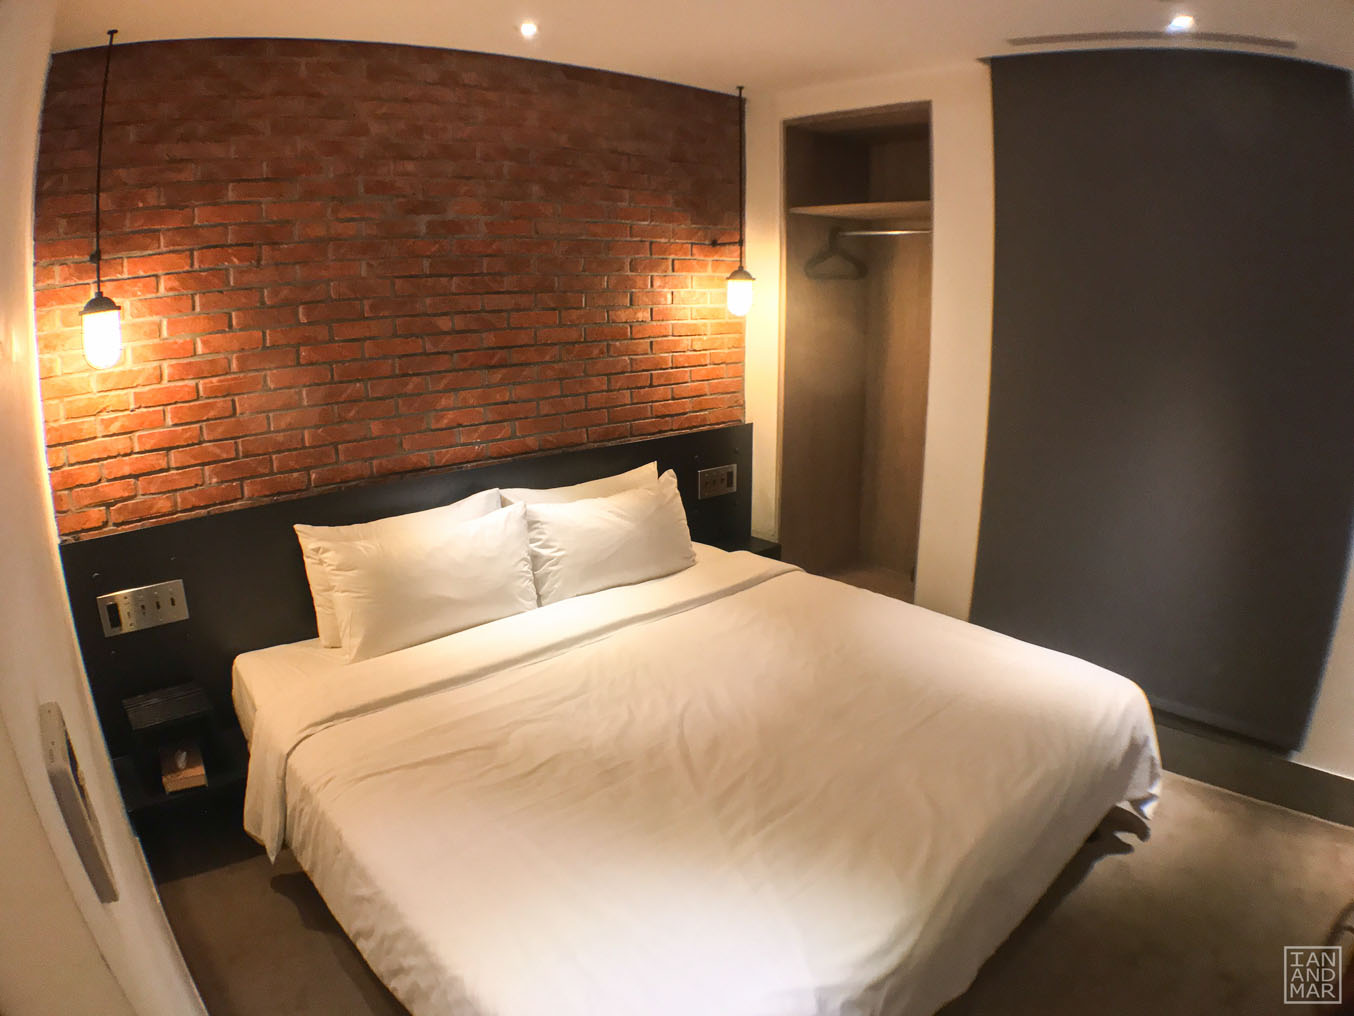 bedroom with brick wall